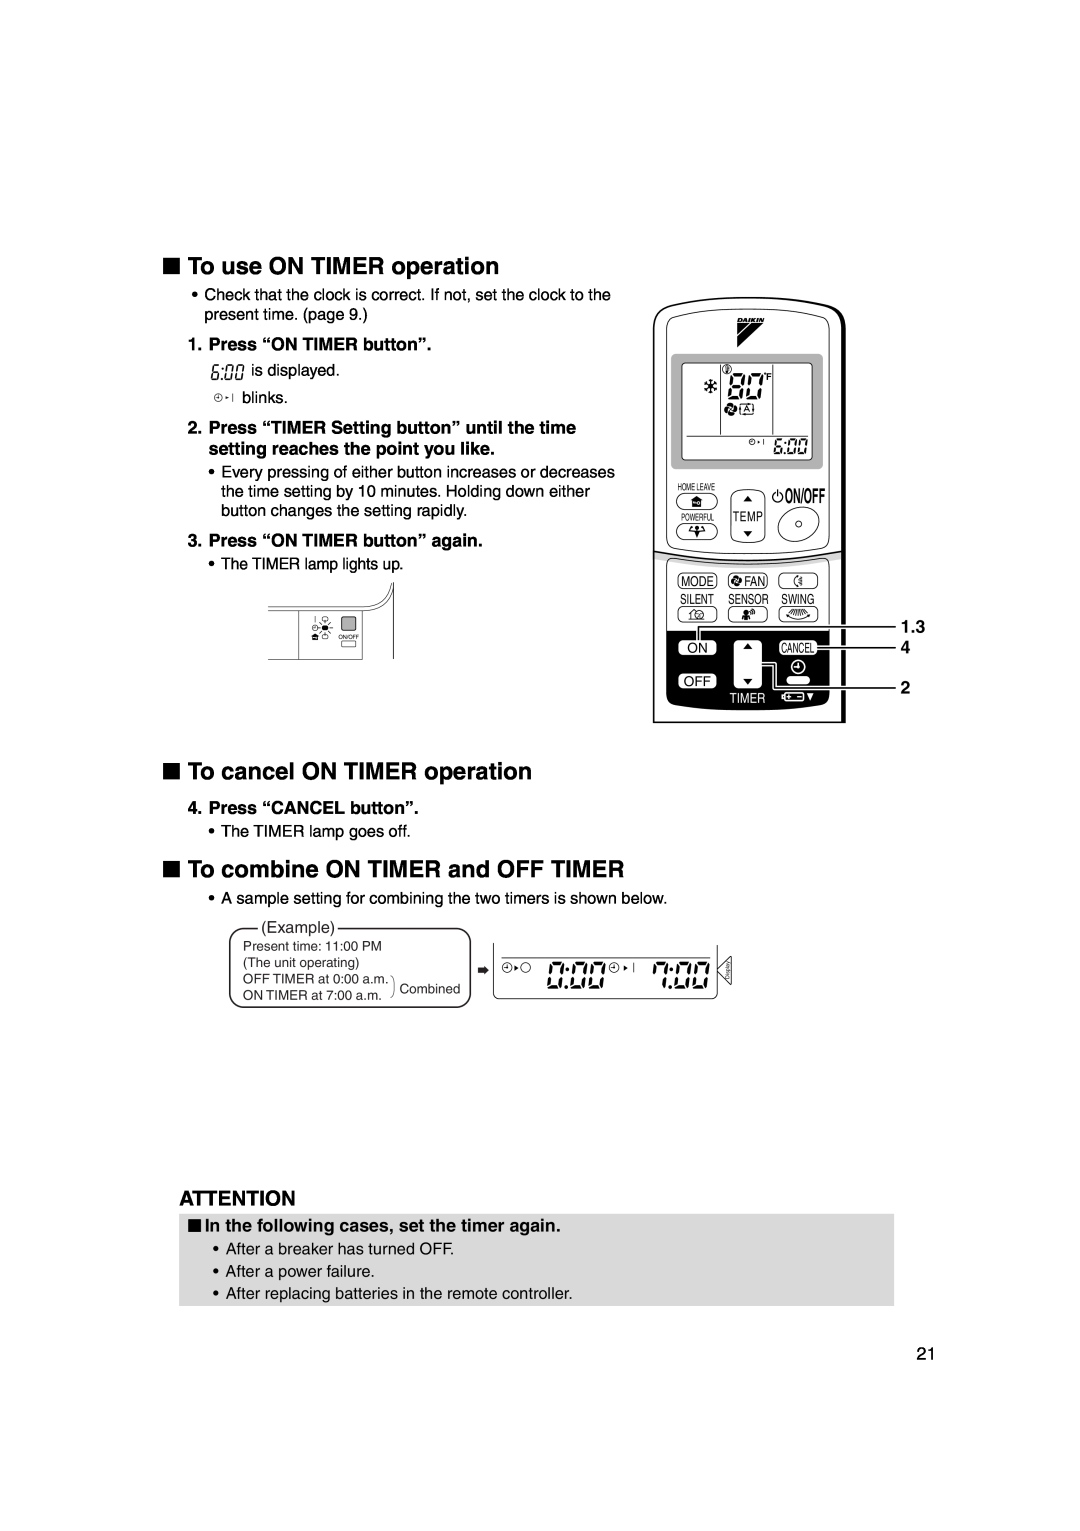 Trane FTXS24DVJU To use ON TIMER operation, To cancel ON TIMER operation, To combine ON TIMER and OFF TIMER, 1.3, On/Off 